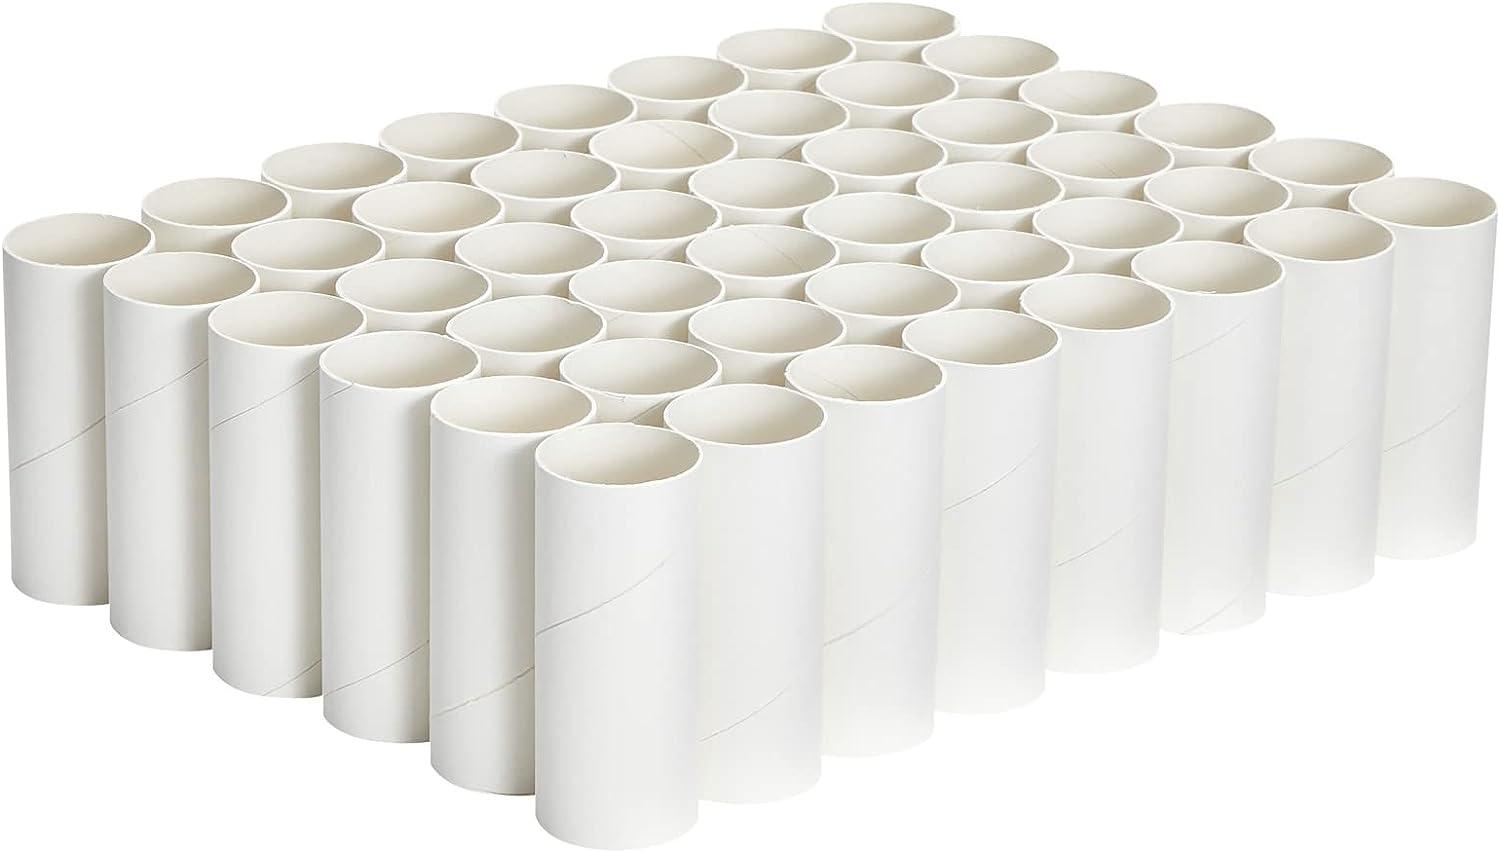 48 Pack Cardboard Tubes for Crafts, Empty Toilet Paper Rolls for Classroom,  DIY Projects (1.6 x 4 Inches) White